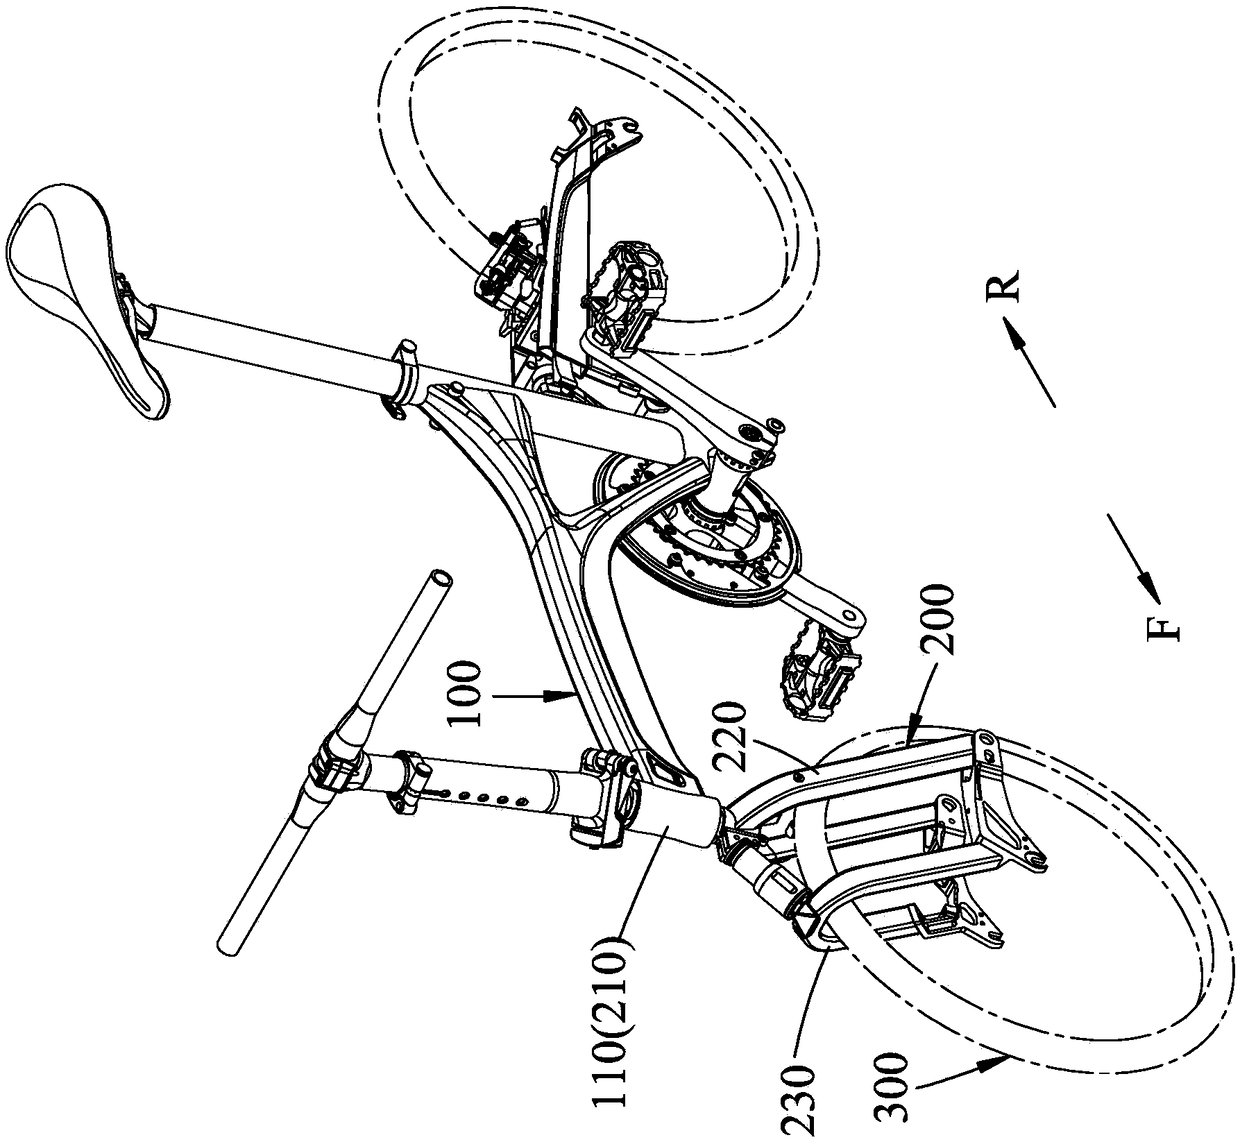 Adjustable Angle's Bicycle Seismic Isolation Device